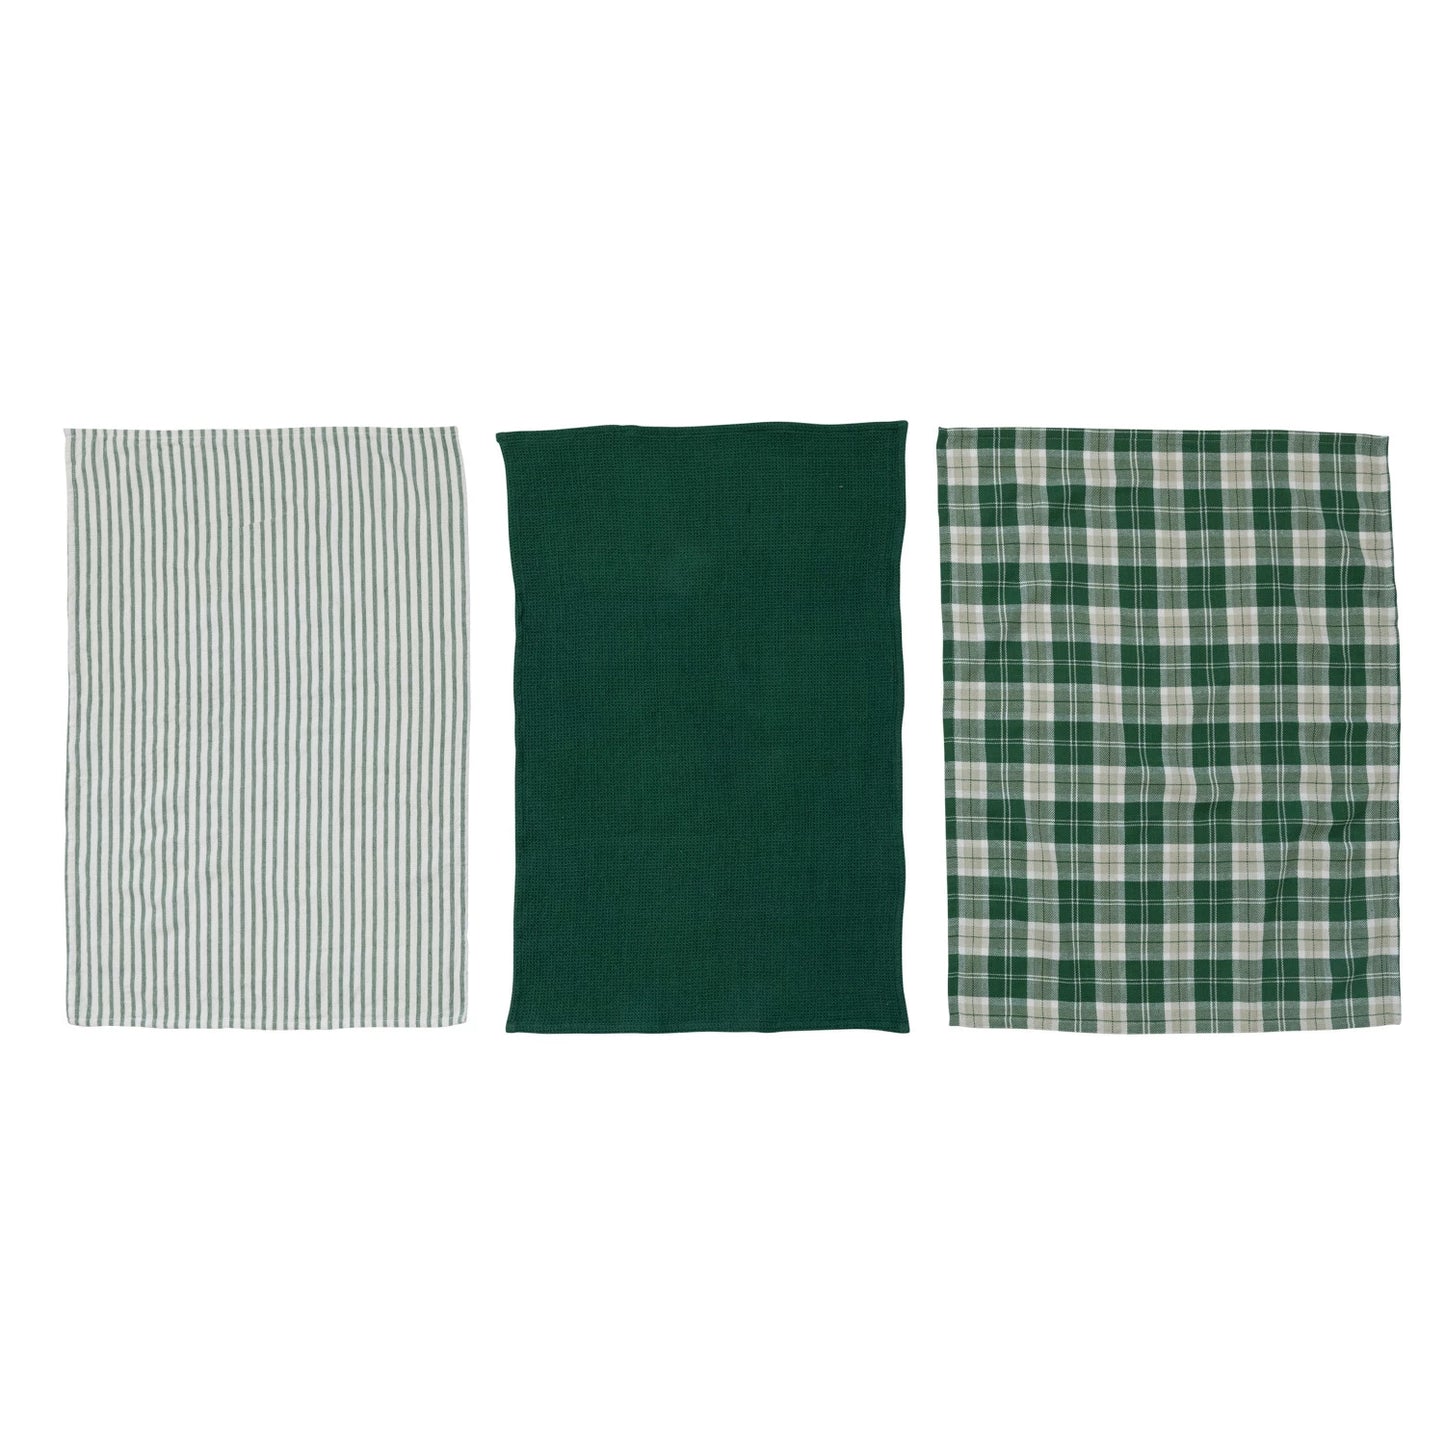 Cotton Woven/Waffle Weave Tea Towels, Green & White, Set of 3